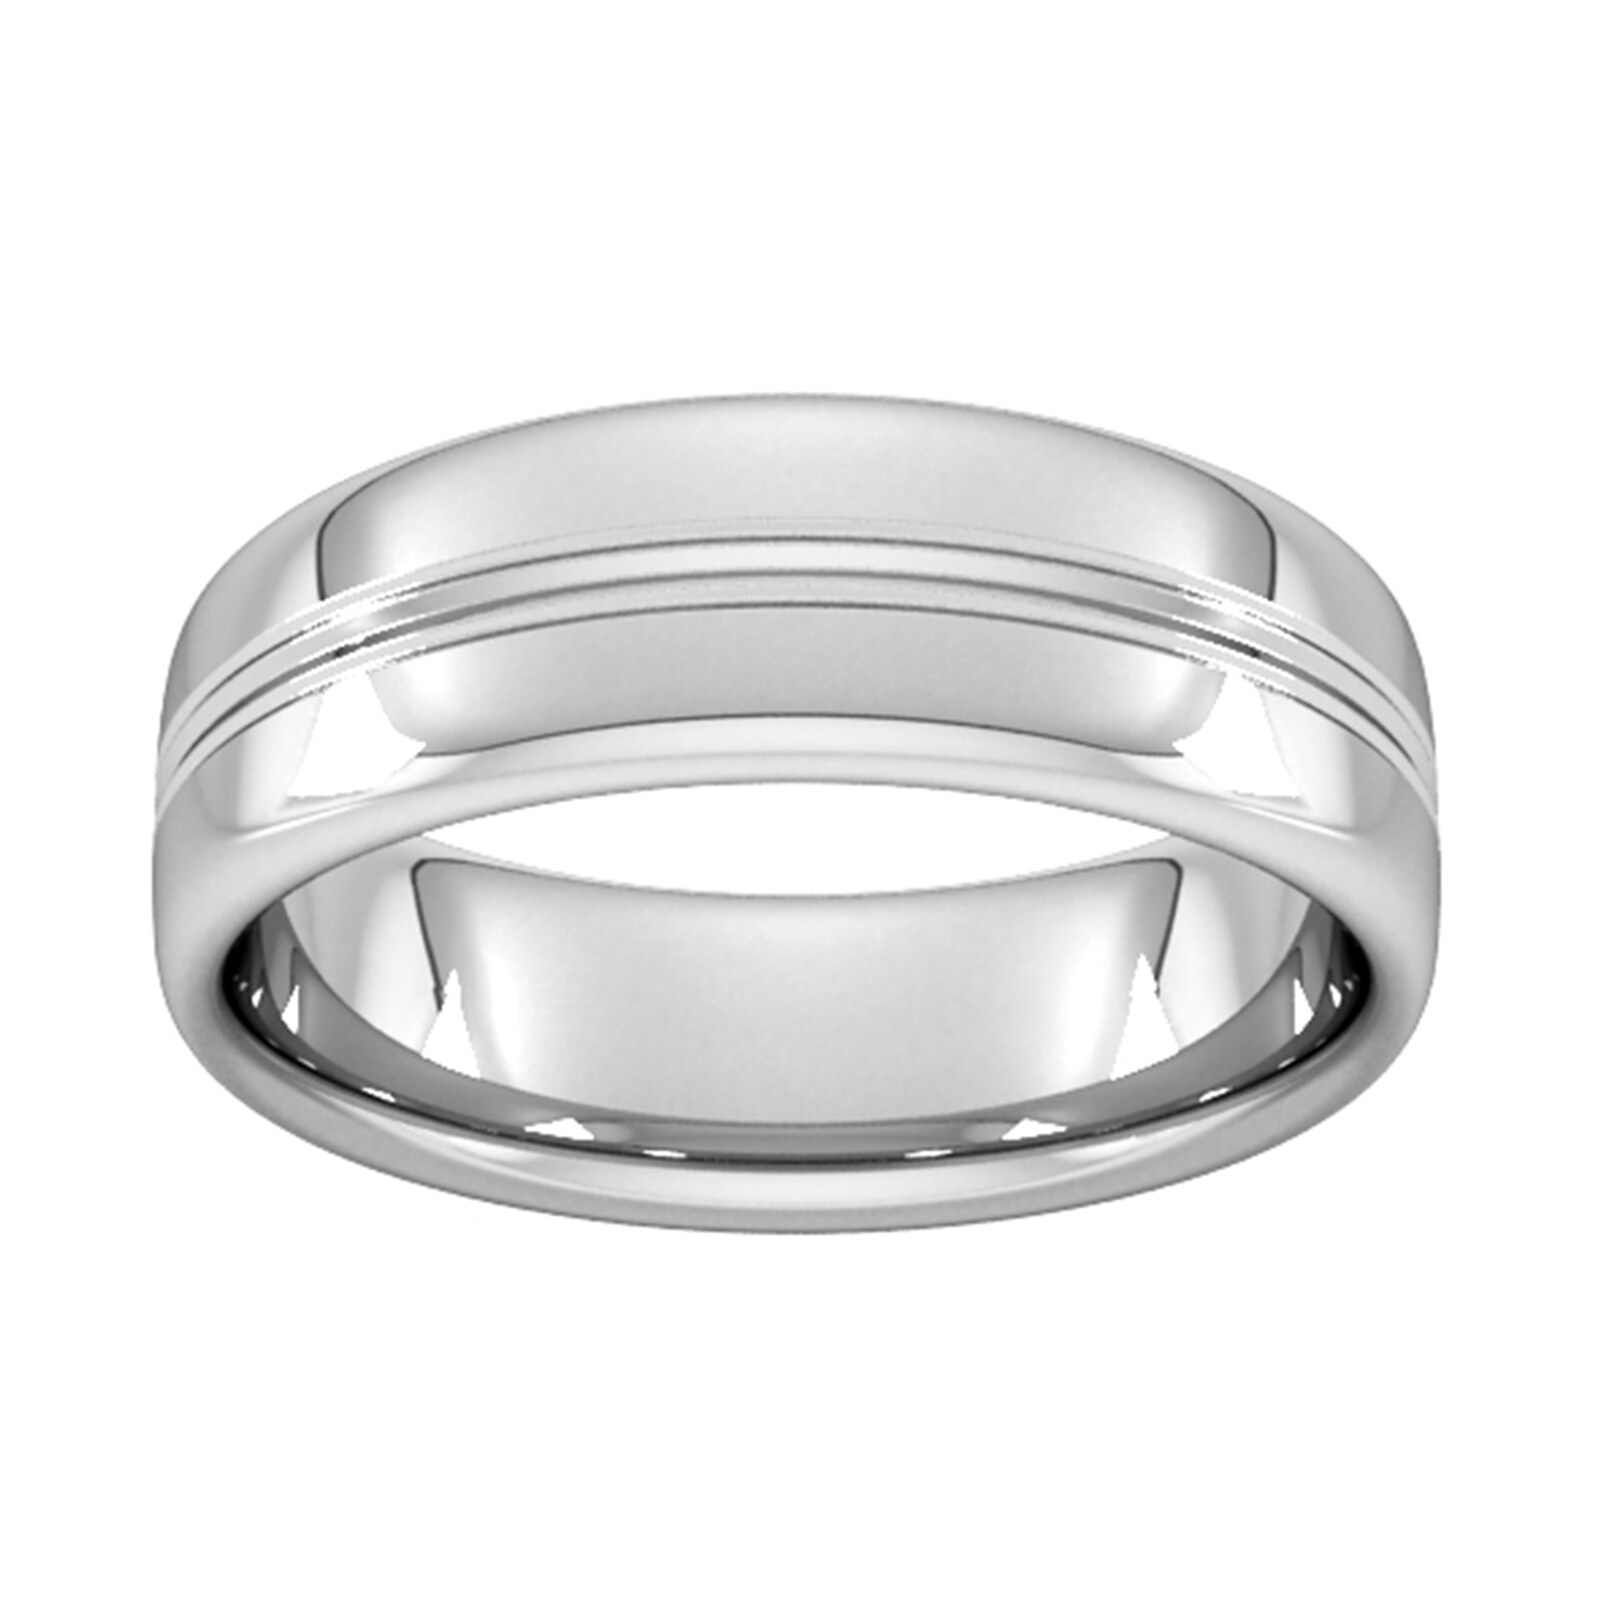 7mm Slight Court Extra Heavy Grooved Polished Finish Wedding Ring In 9 Carat White Gold - Ring Size L